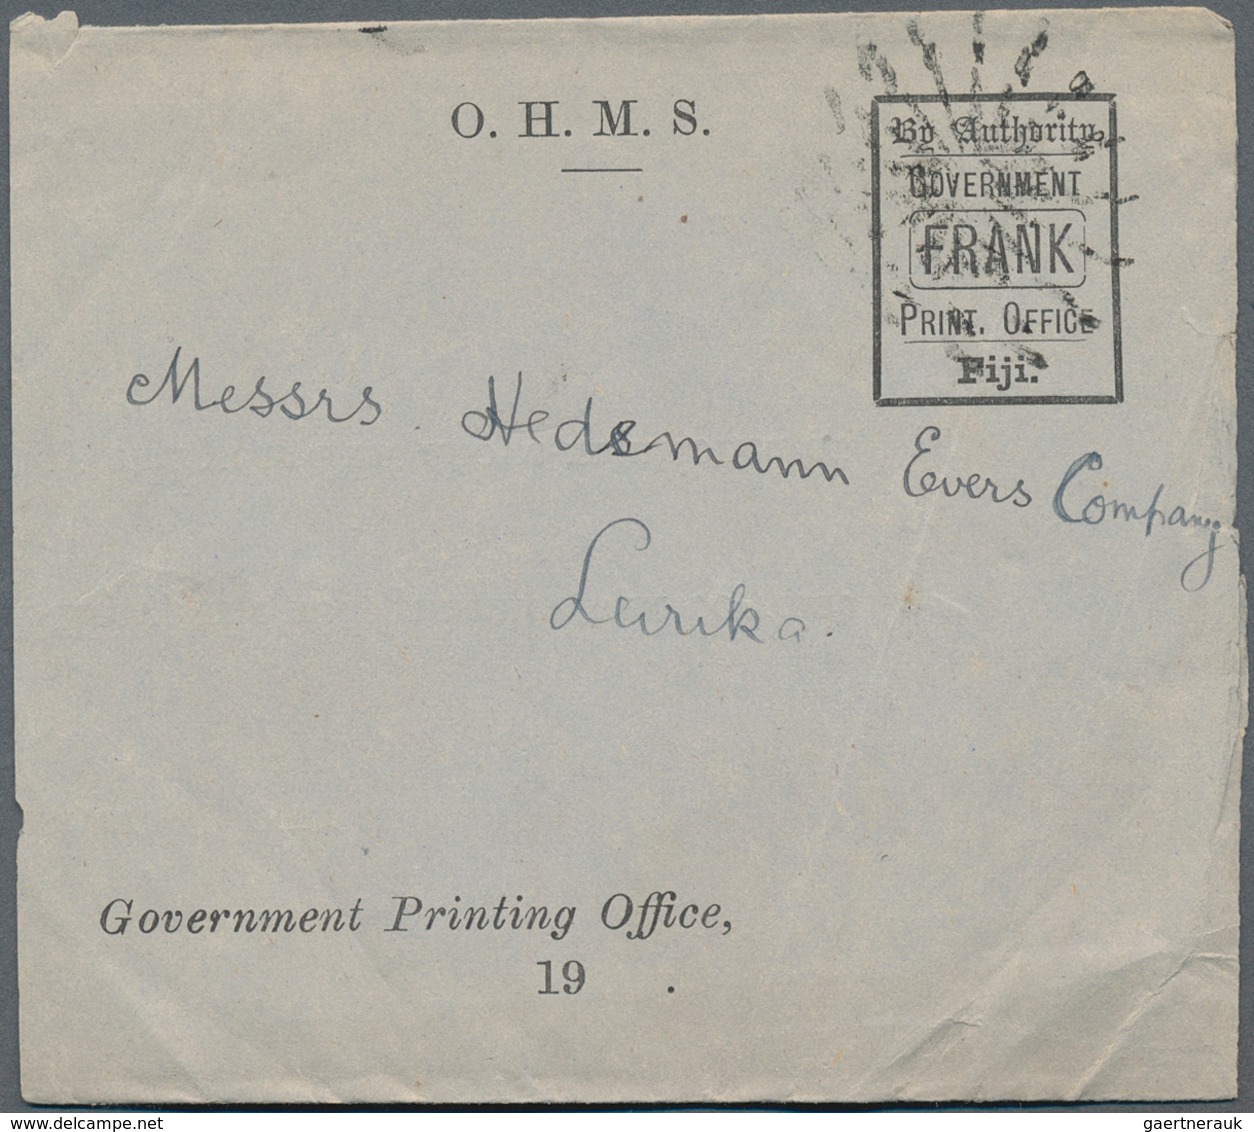 Fiji-Inseln: 1890/1955 (ca.), cards (7), inbound (3) 1912 from Switzerland and UK, airmails KGVI/QEI